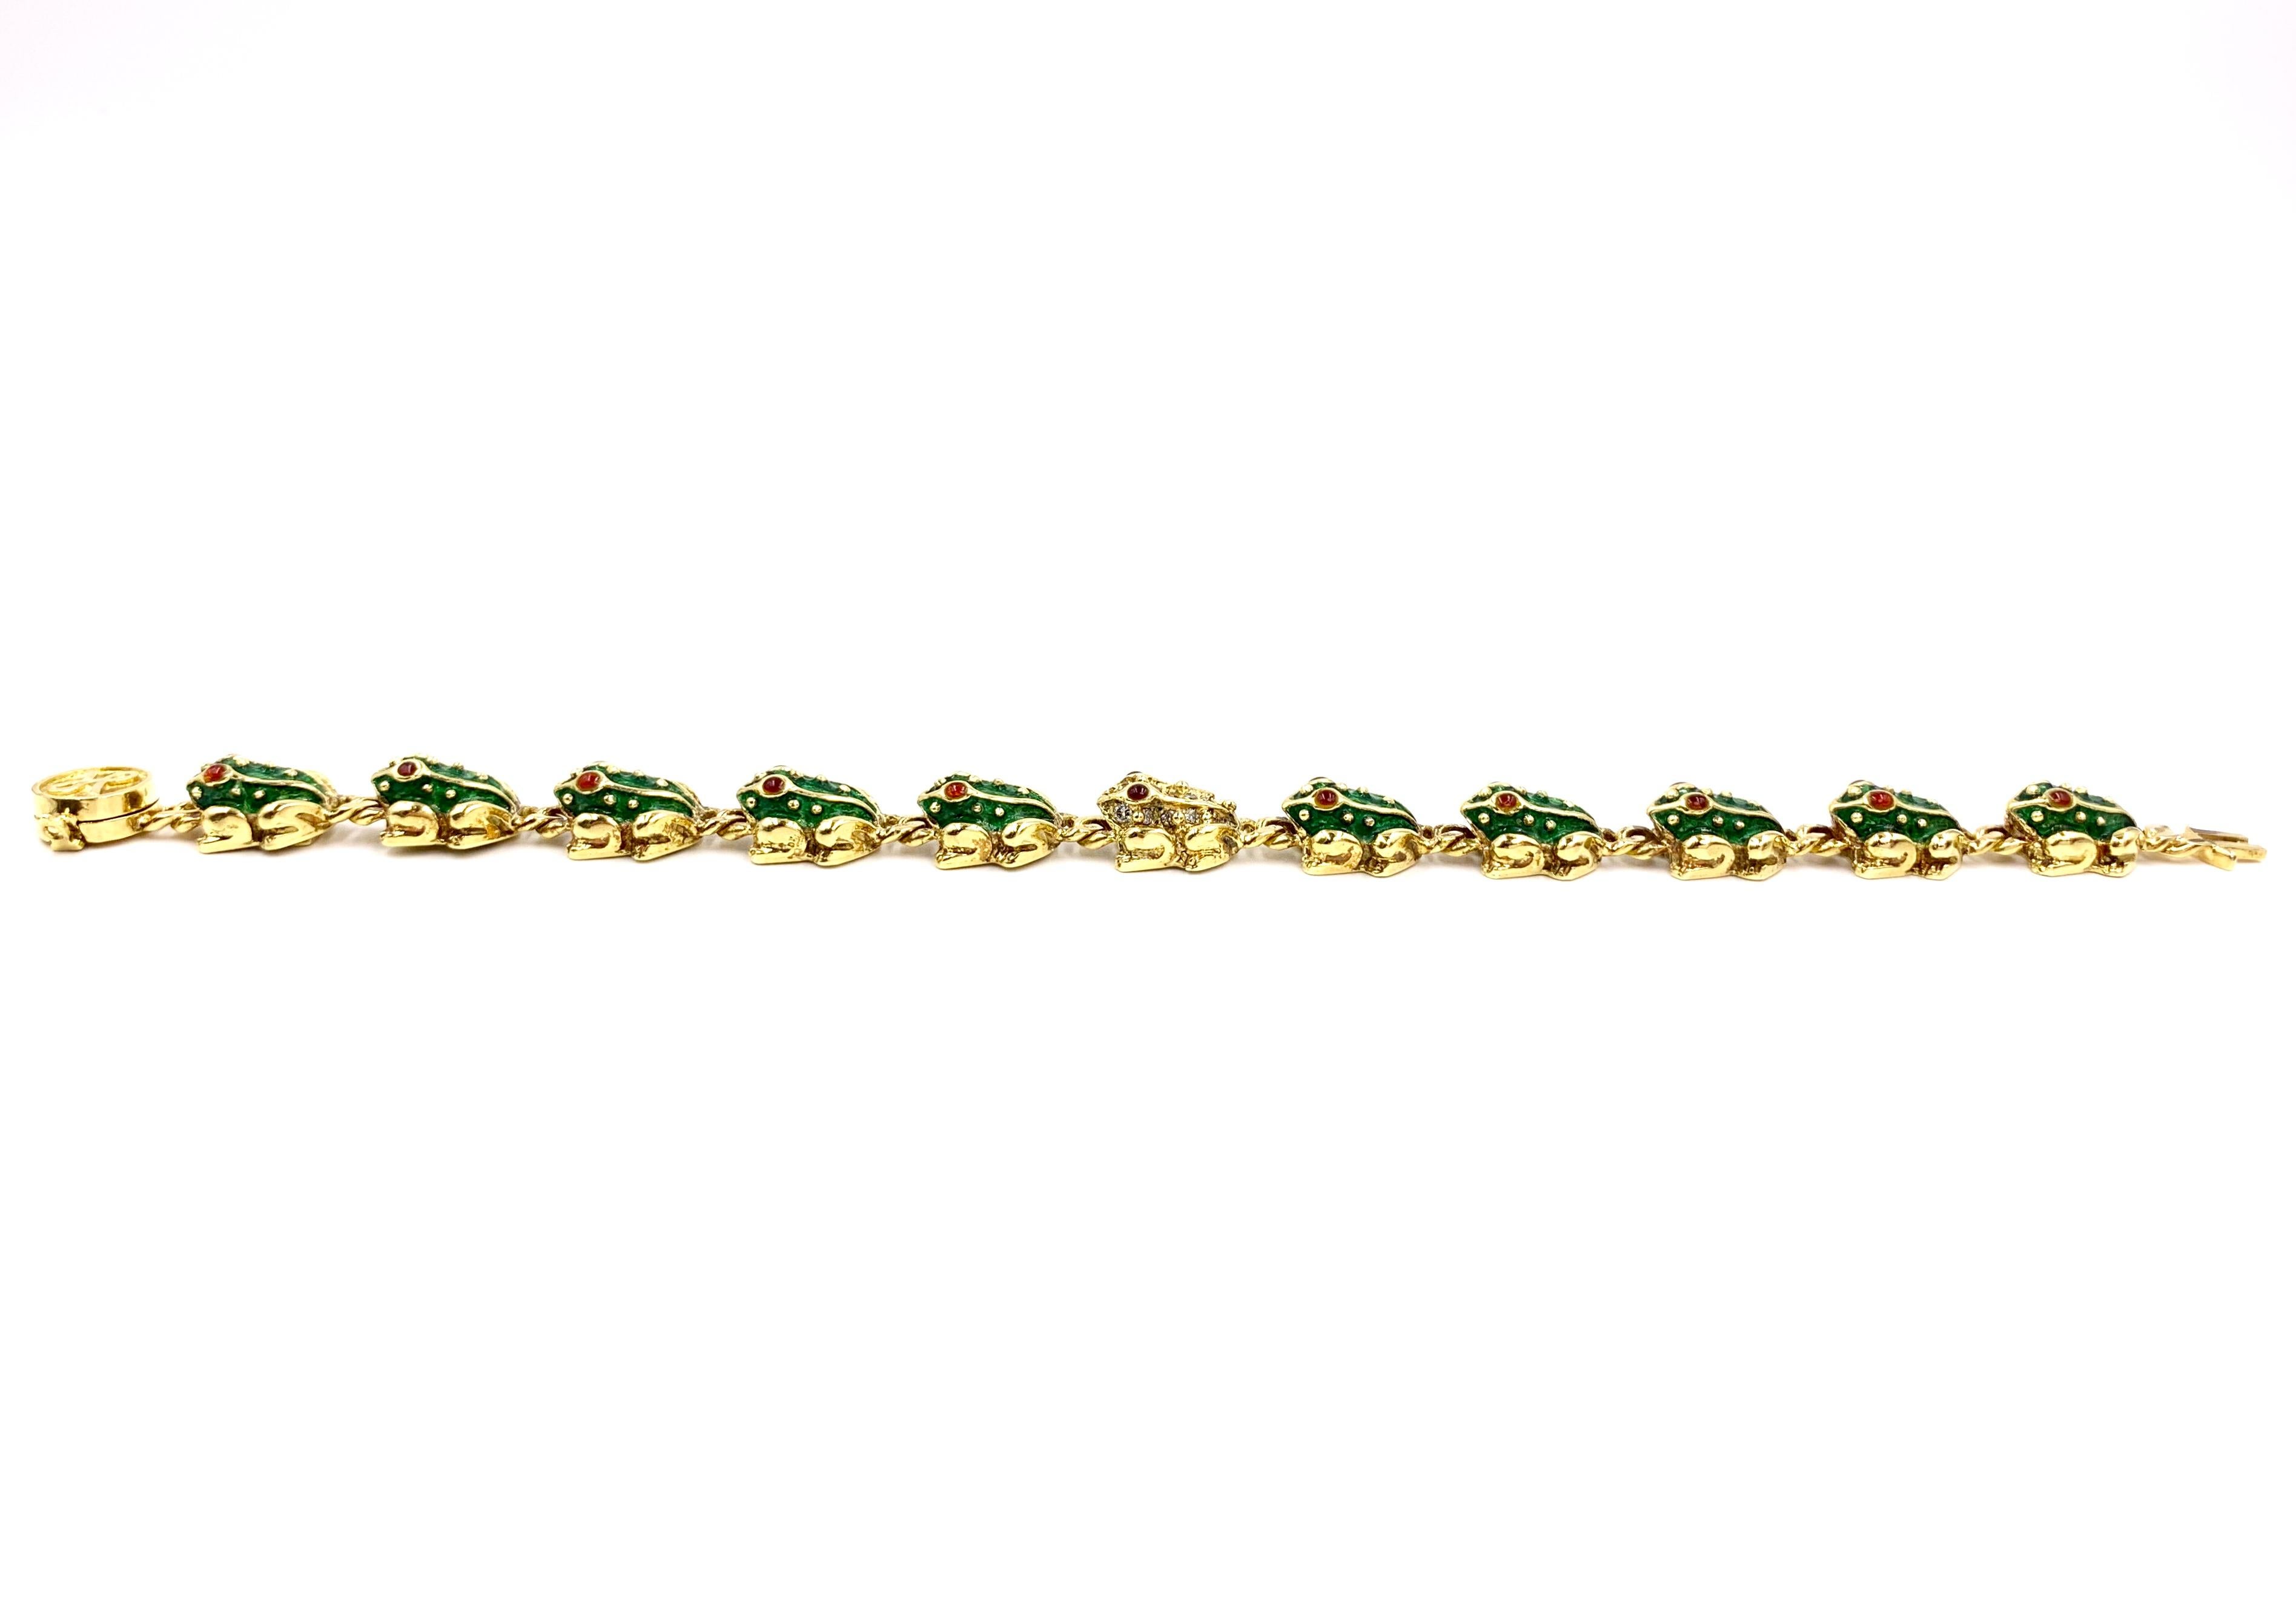 In classic Hidalgo style, a polished 18 karat yellow gold and green enamel frog bracelet featuring 22 cabochon ruby eyes and 17 round diamonds set on the center gold frog. 
Width of bracelet is 10mm